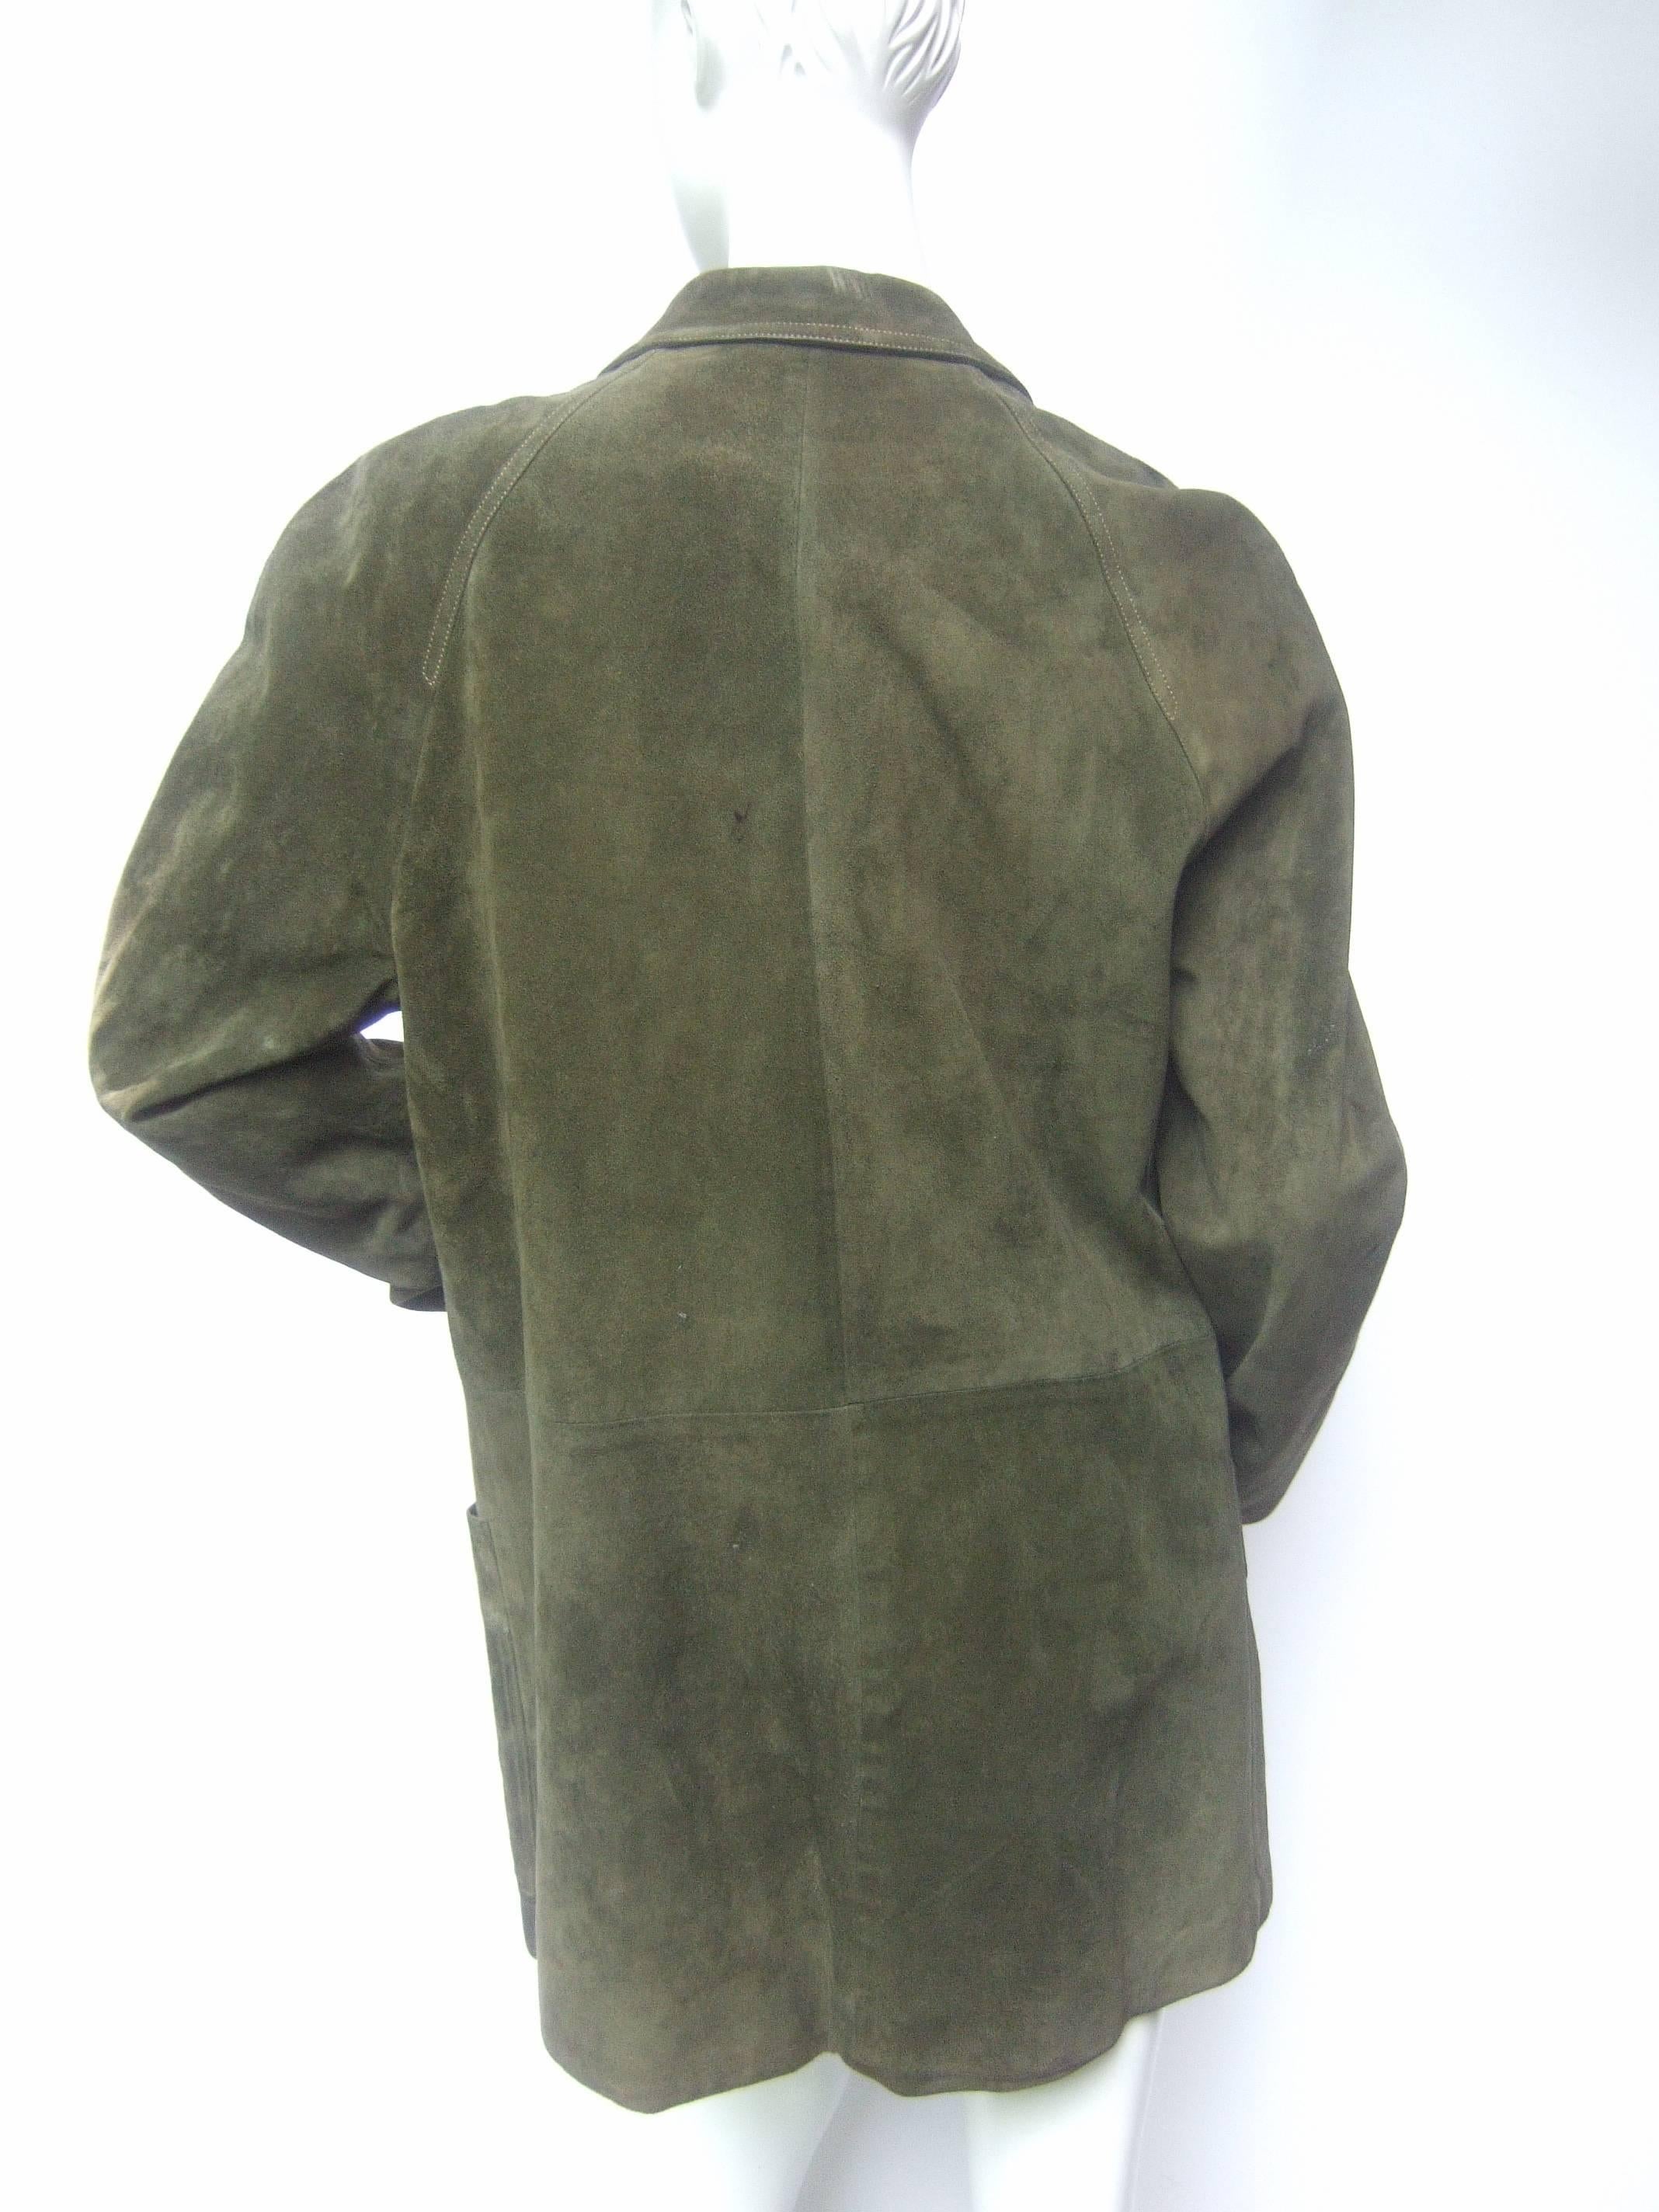 Gucci Italy Moss Green Suede Shabby Chic Unisex Jacket c 1970s 1